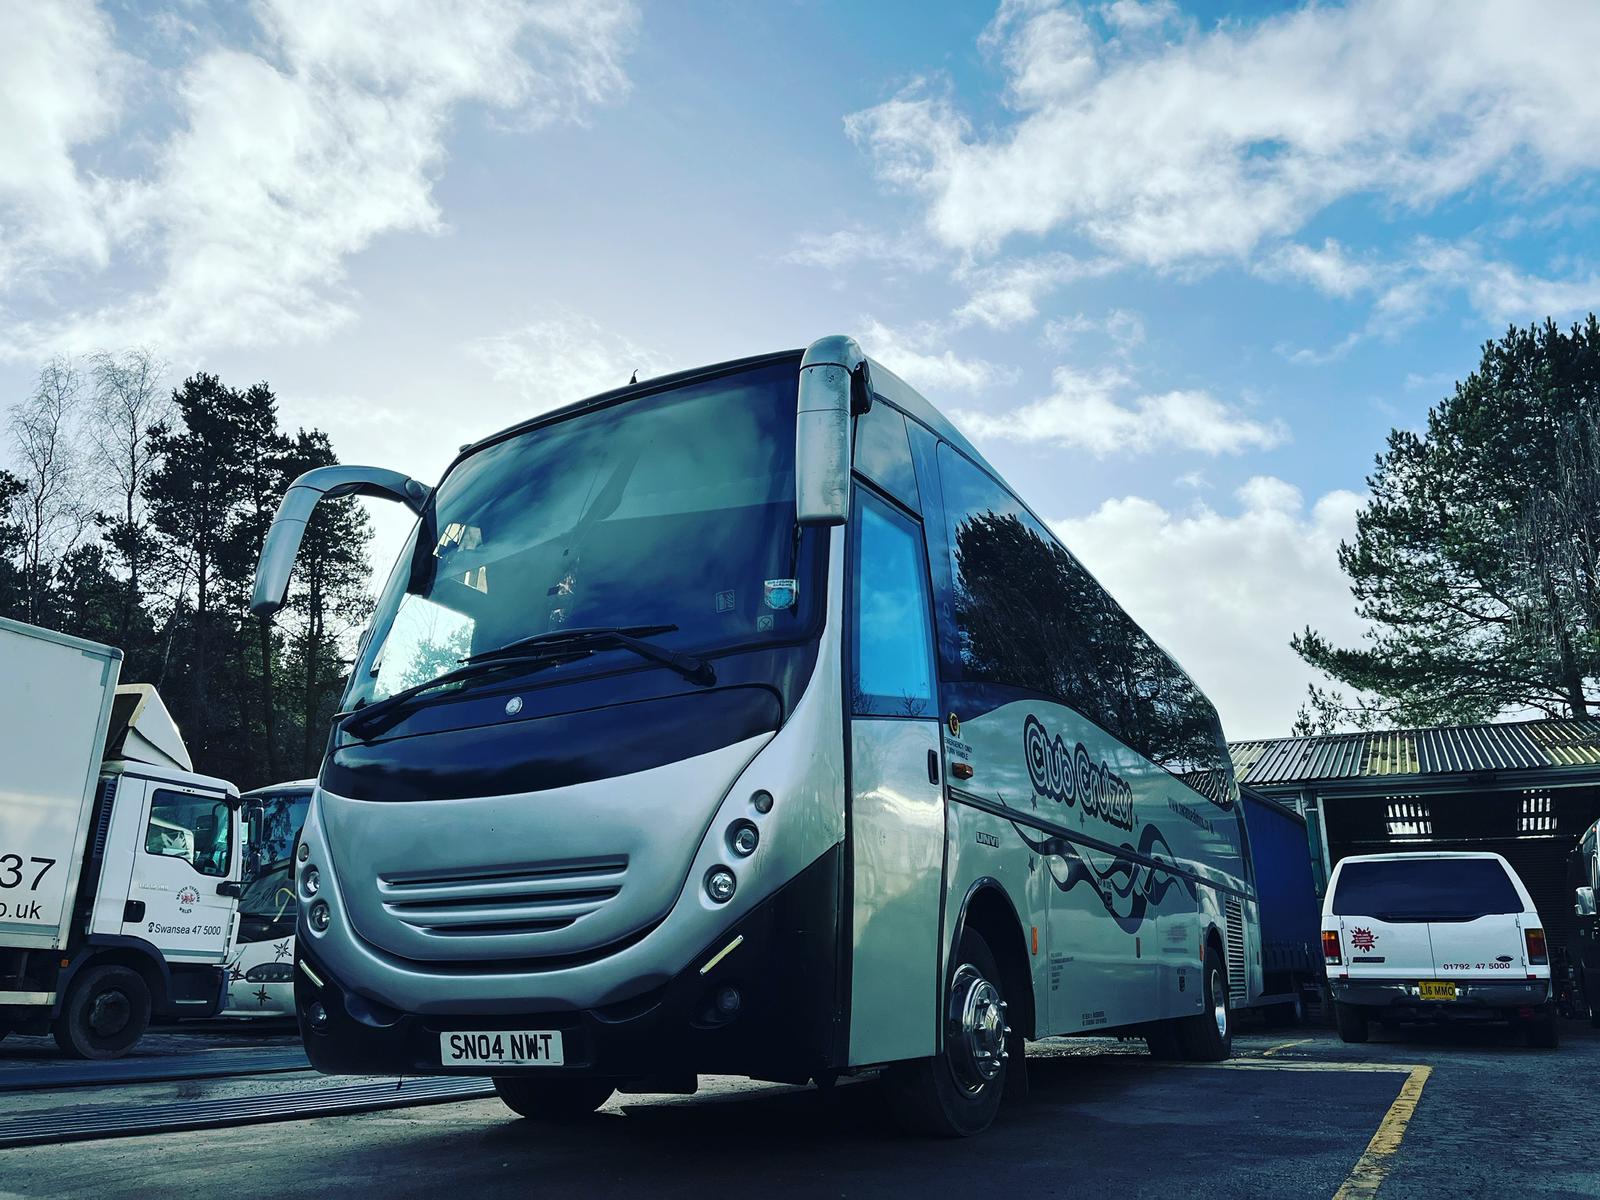 Party Bus Hire in Bristol: Affordable and Fun Party Bus Hire in Bristol